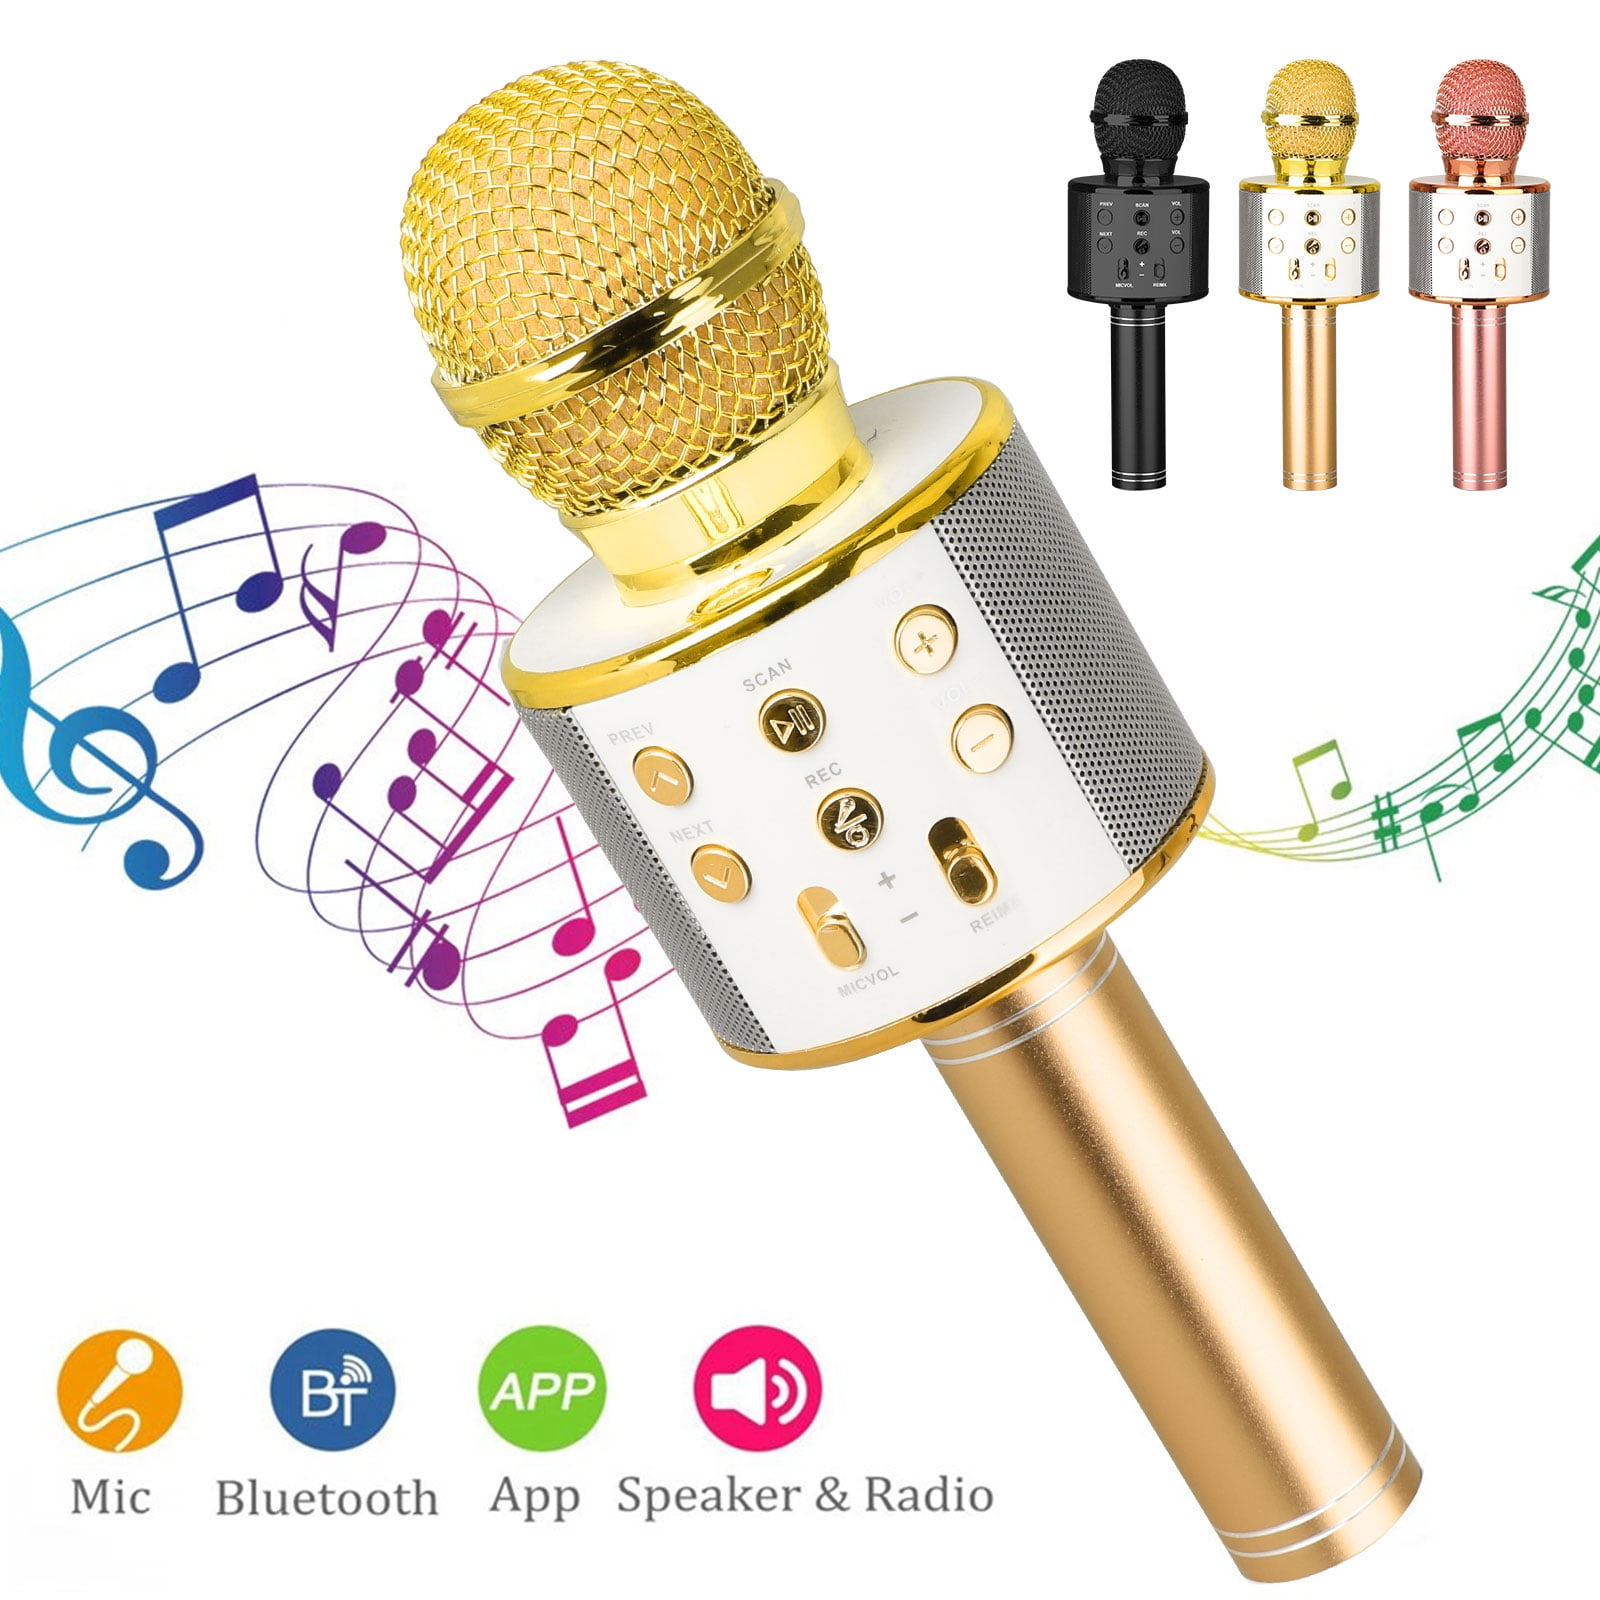 Compatible Android&iOS Handheld Karaoke Machine for Home KTV Party Birthday Gifts Rose Gold New XIANRUI Portable Karaoke with Speaker for Kids Adults Bluetooth Karaoke Microphone with LED Lights